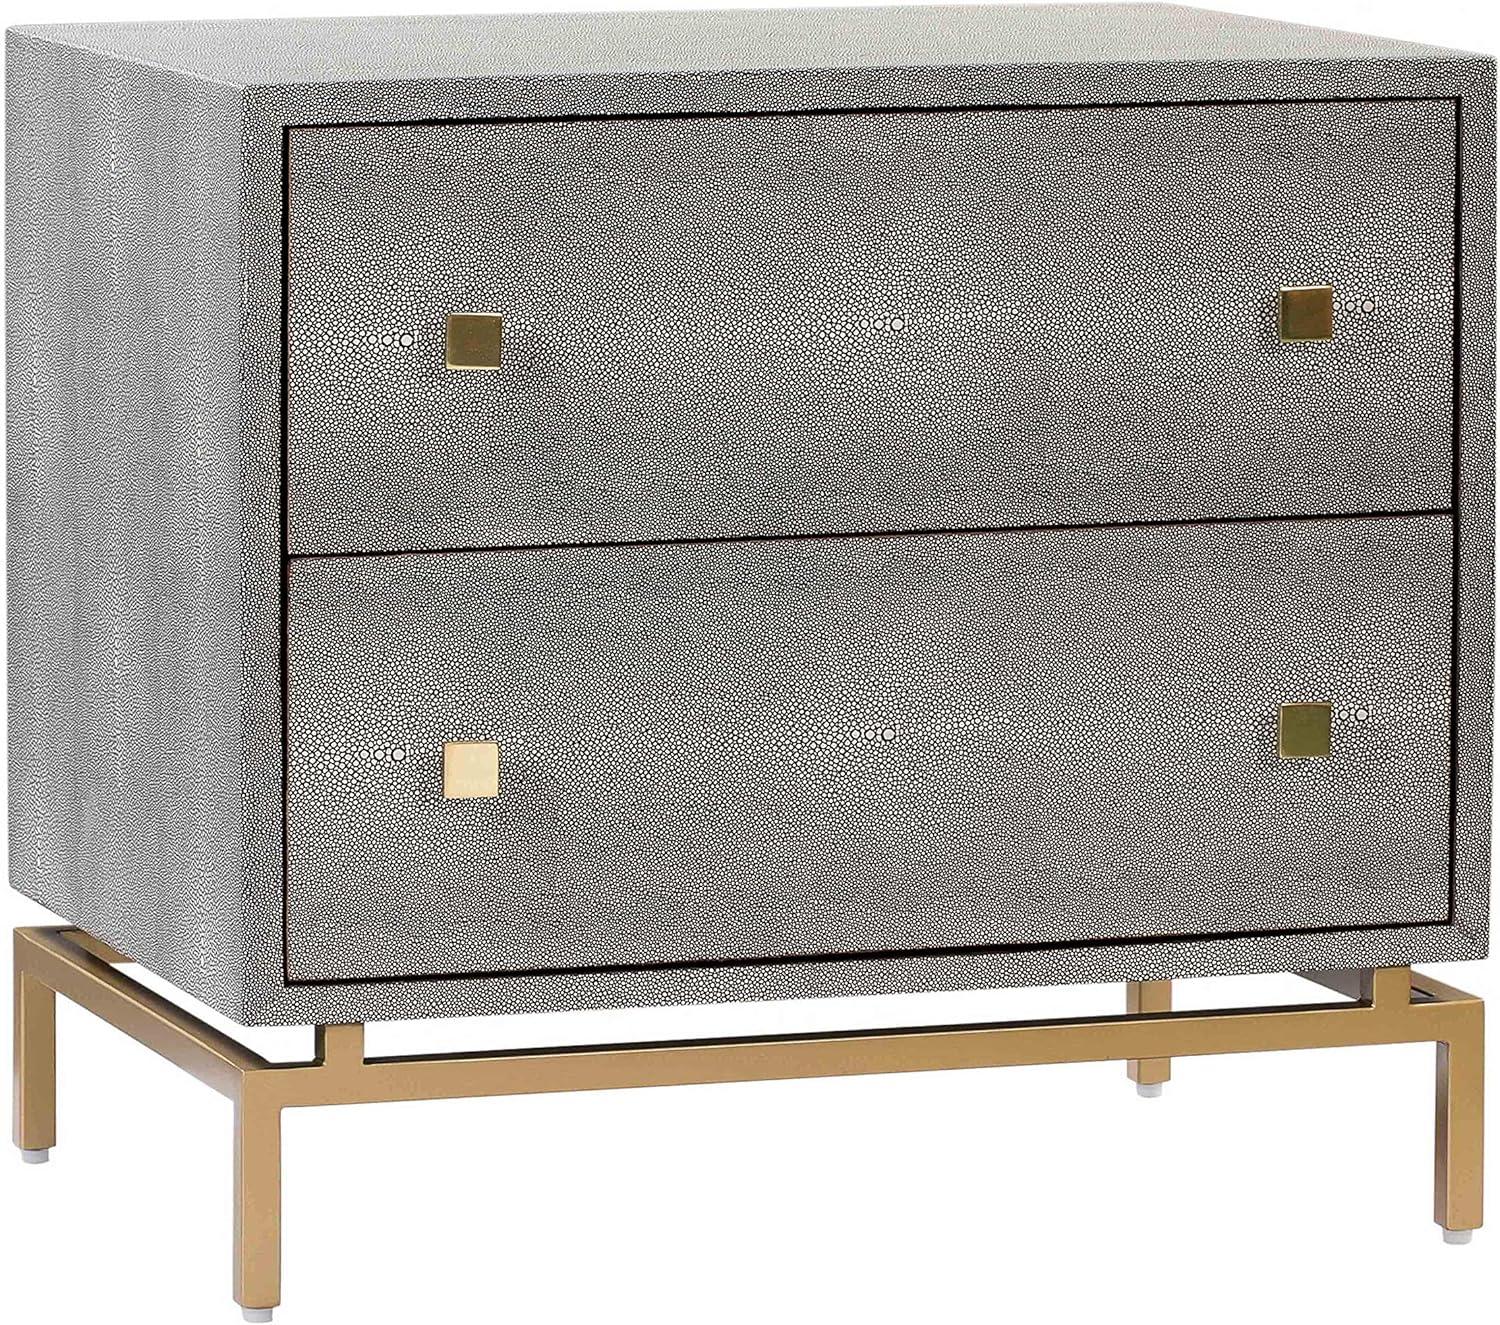 Pesce Modern Gray Shagreen 2-Drawer Nightstand with Brass Accents